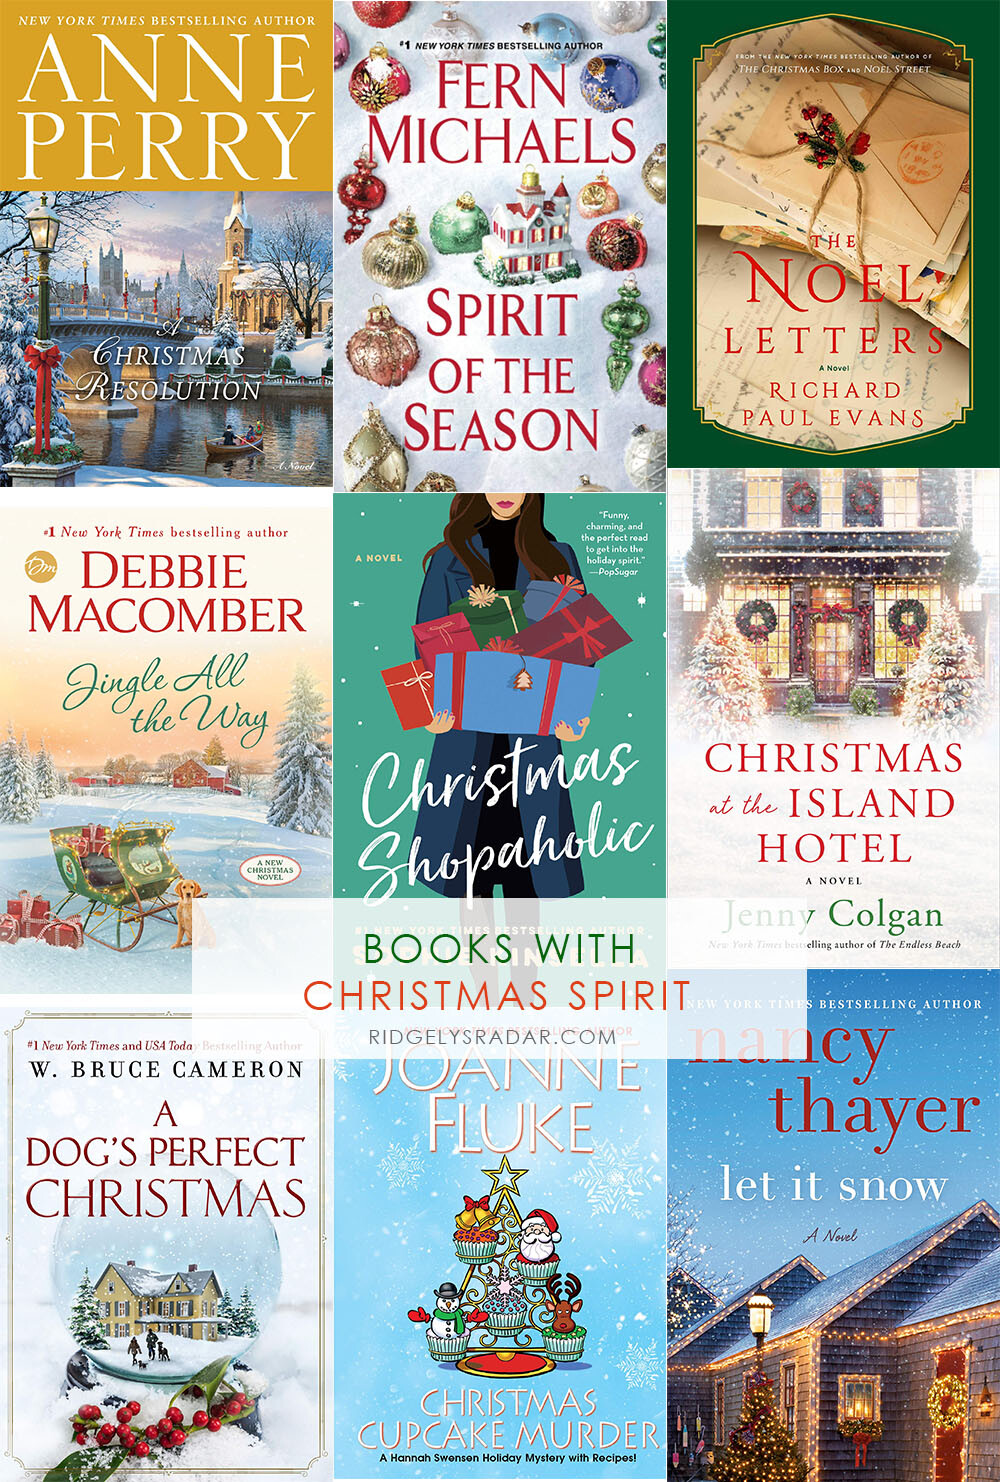 Get into the Christmas Spirit with books, from spicy romances to adventurous mysteries, centered around the festive Holiday. 